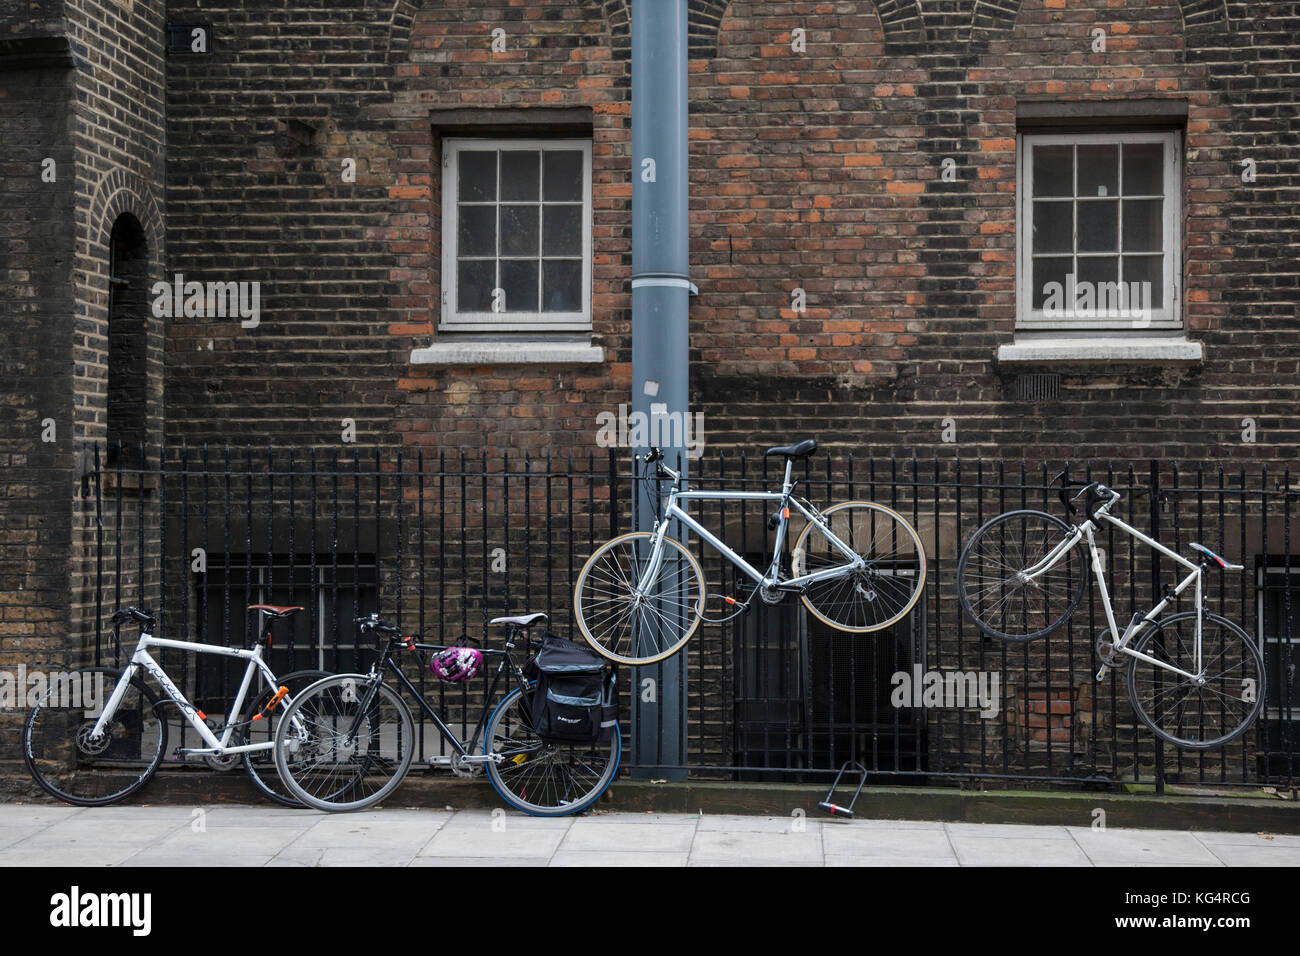 Quirky bicycle parking on rails, London, England, United Kingdom Stock Photo